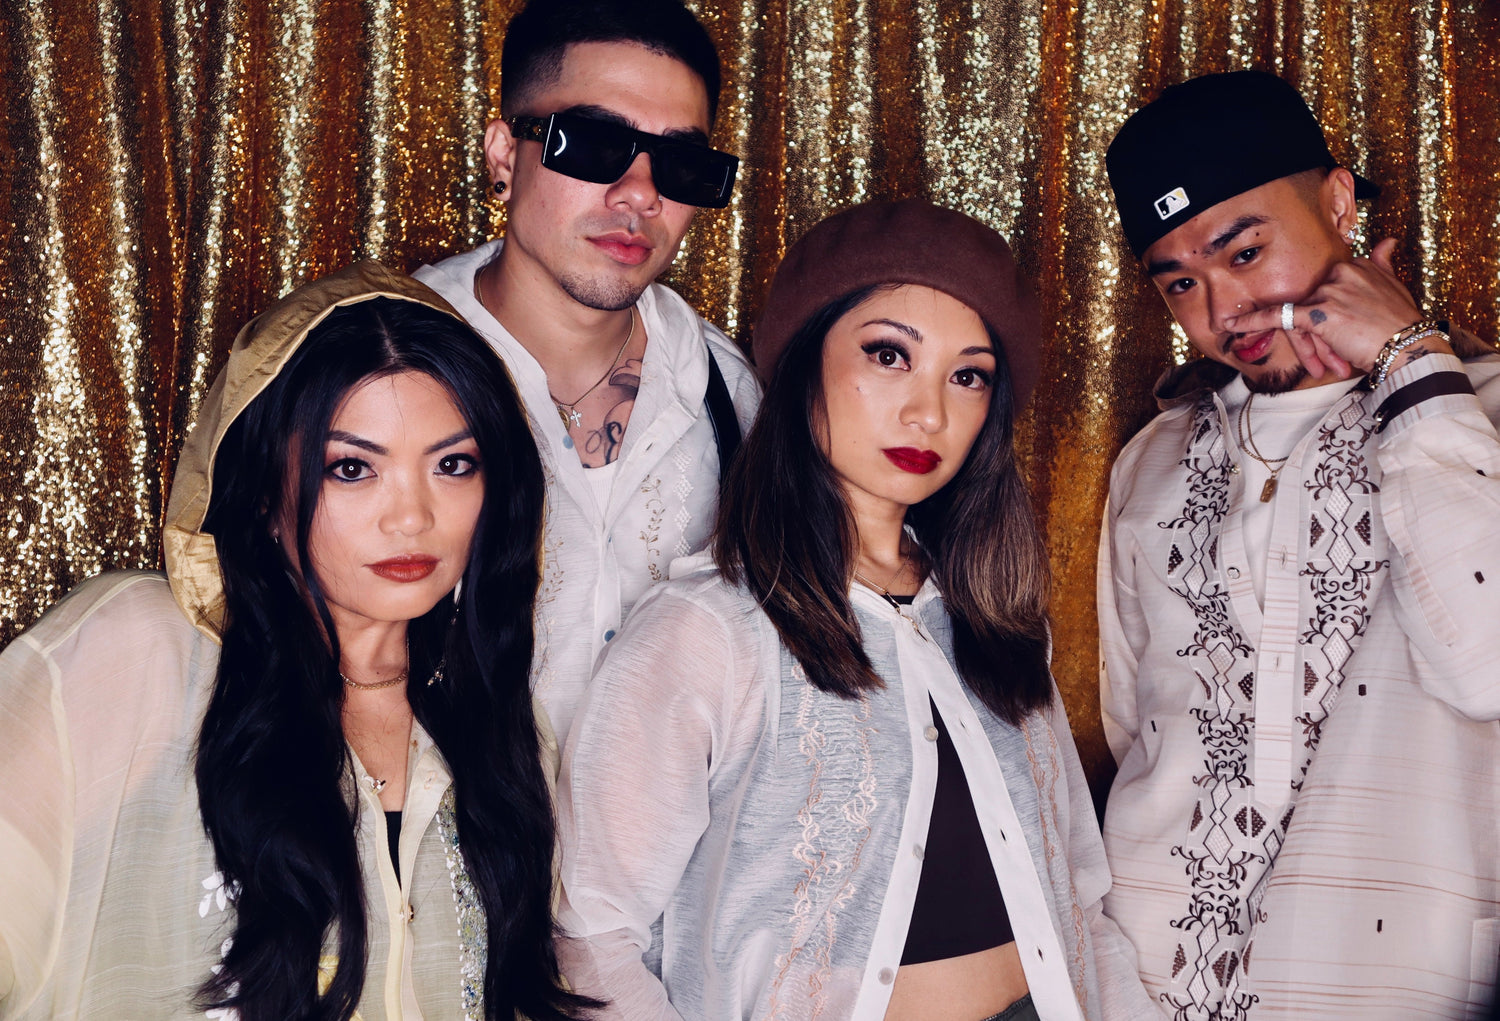 Two Filipina women and 2 Filipino men are posing in front of a sequin curtain wearing different styles of barong hoodies.